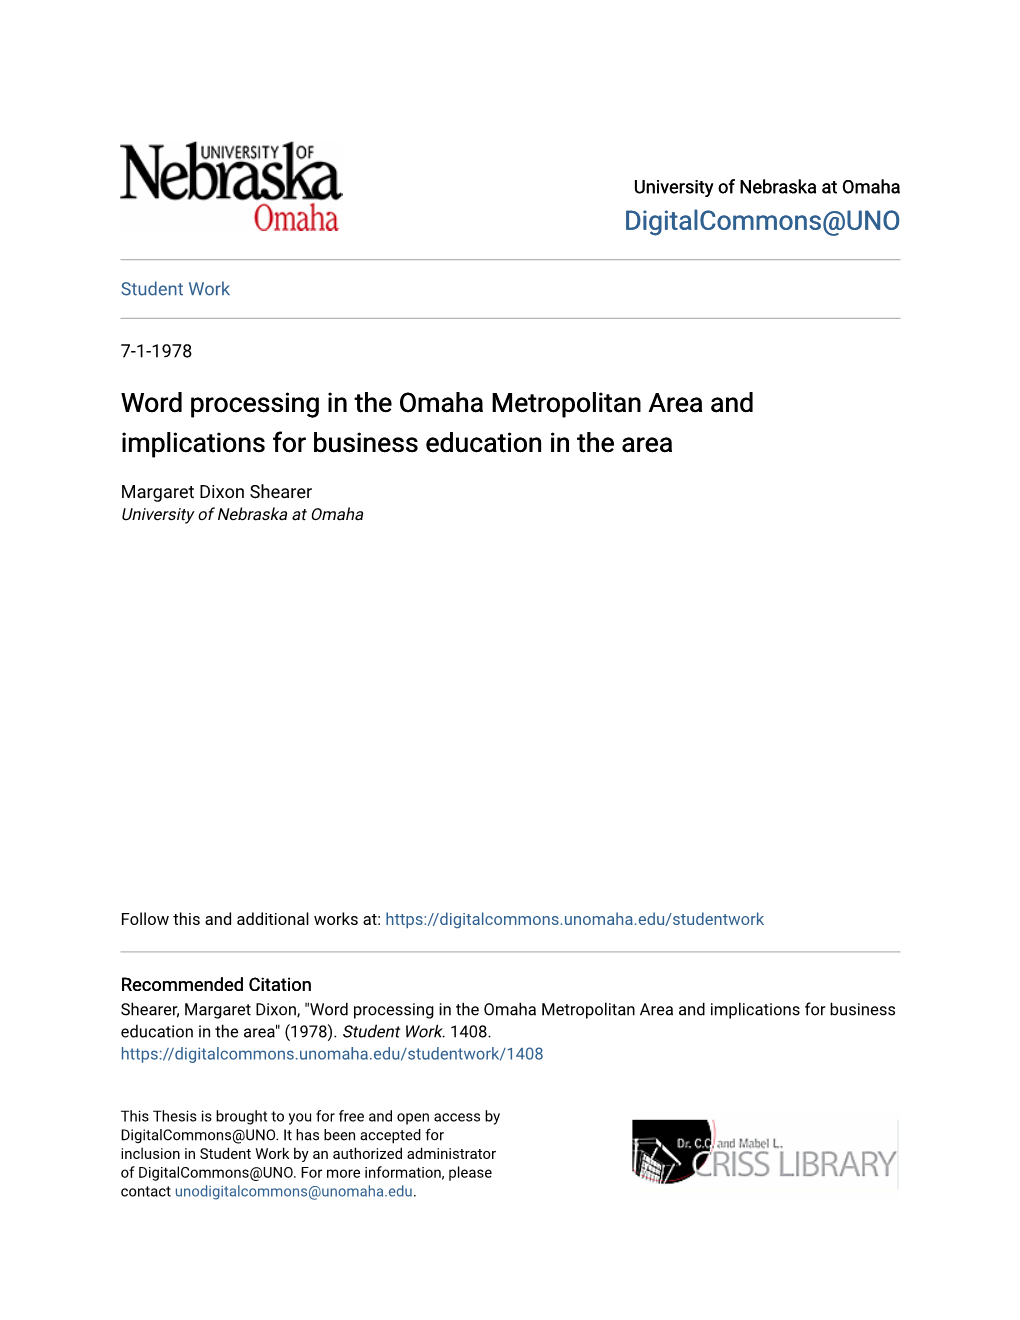 Word Processing in the Omaha Metropolitan Area and Implications for Business Education in the Area